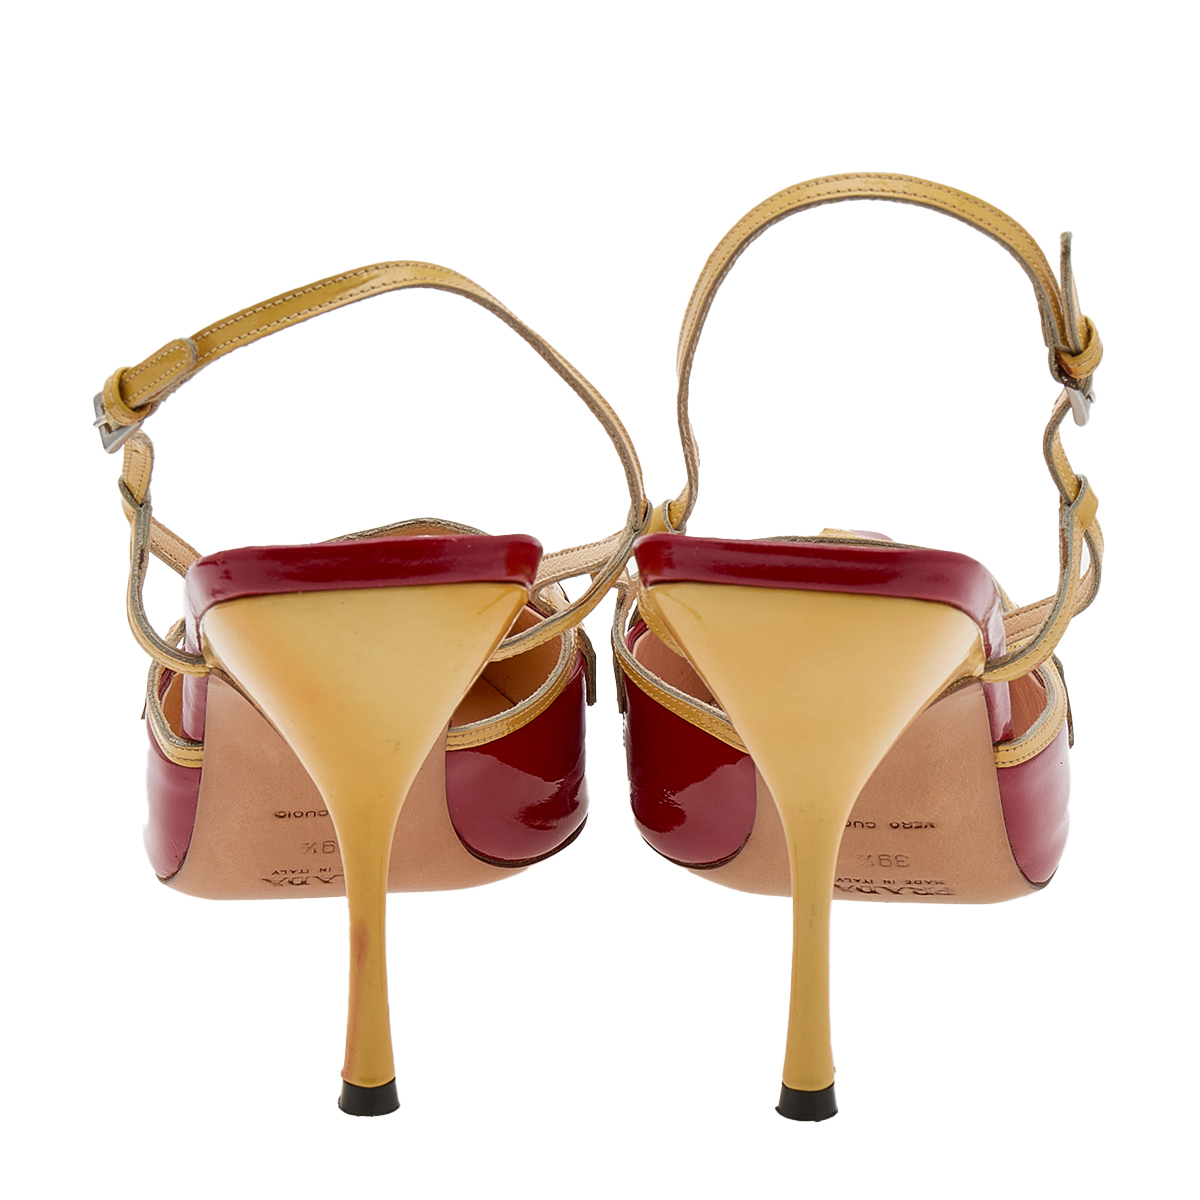 Prada Red/Yellow Patent Leather Slingback Sandals Size 39.5